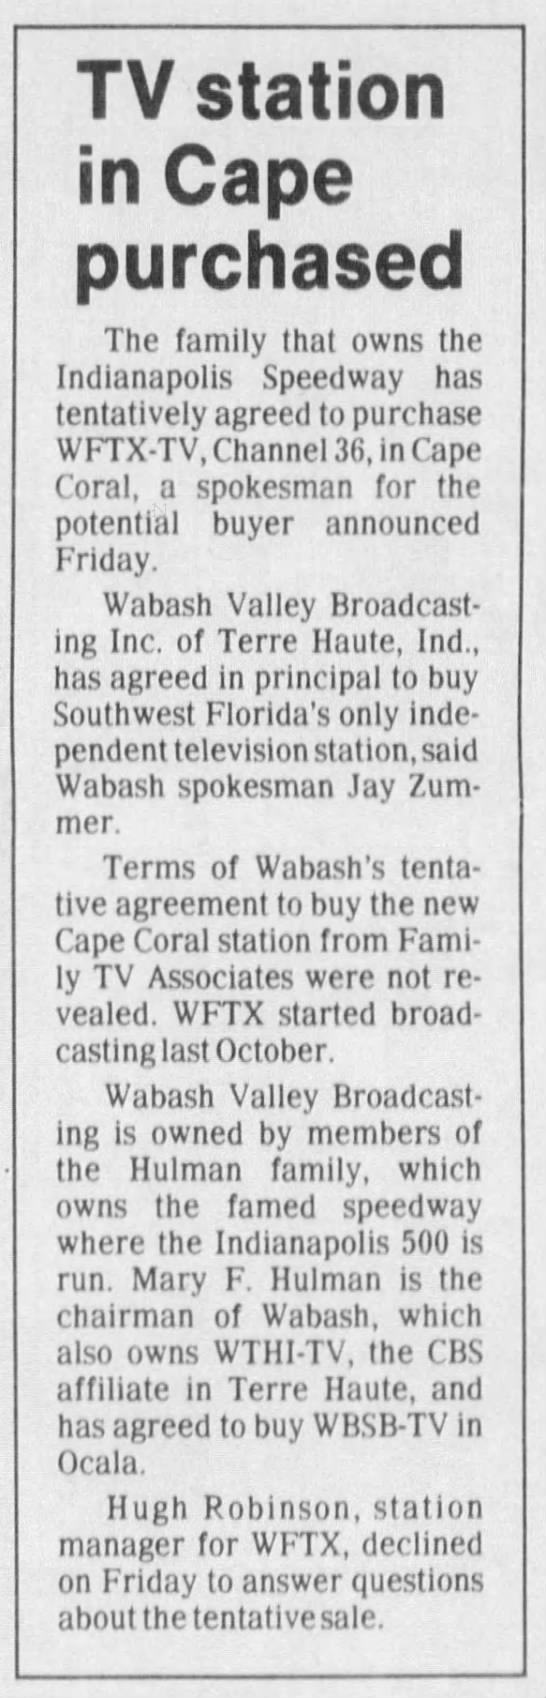 TV station in Cape purchased - 